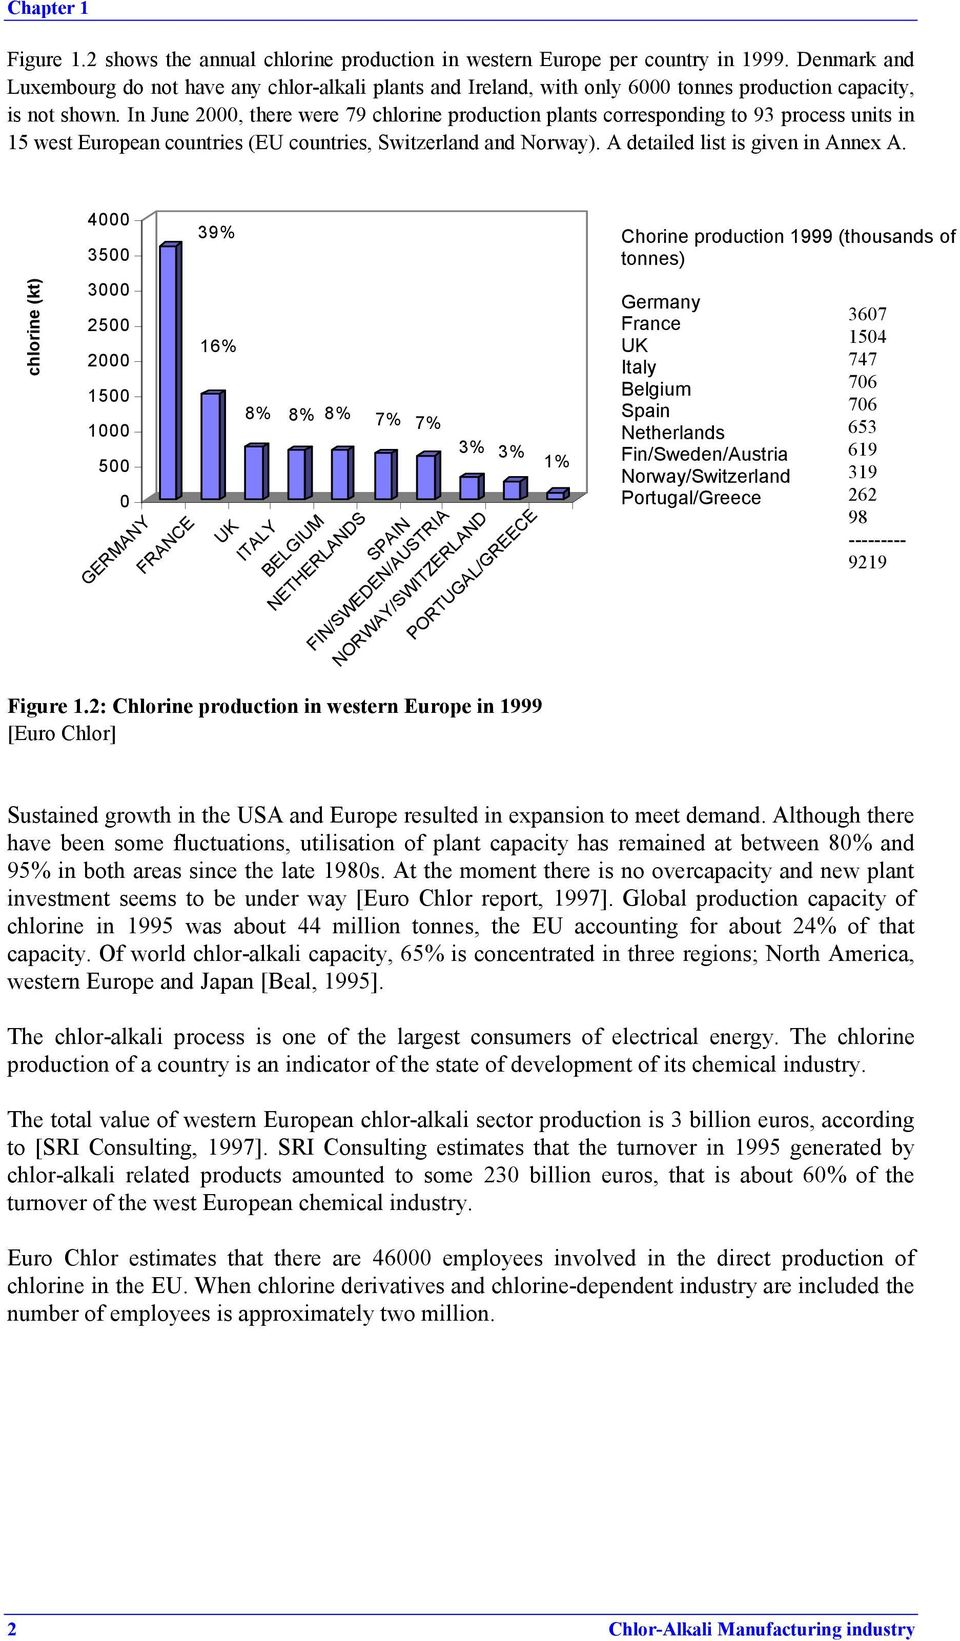 In June 2000, there were 79 chlorine production plants corresponding to 93 process units in 15 west European countries (EU countries, Switzerland and Norway). A detailed list is given in Annex A.